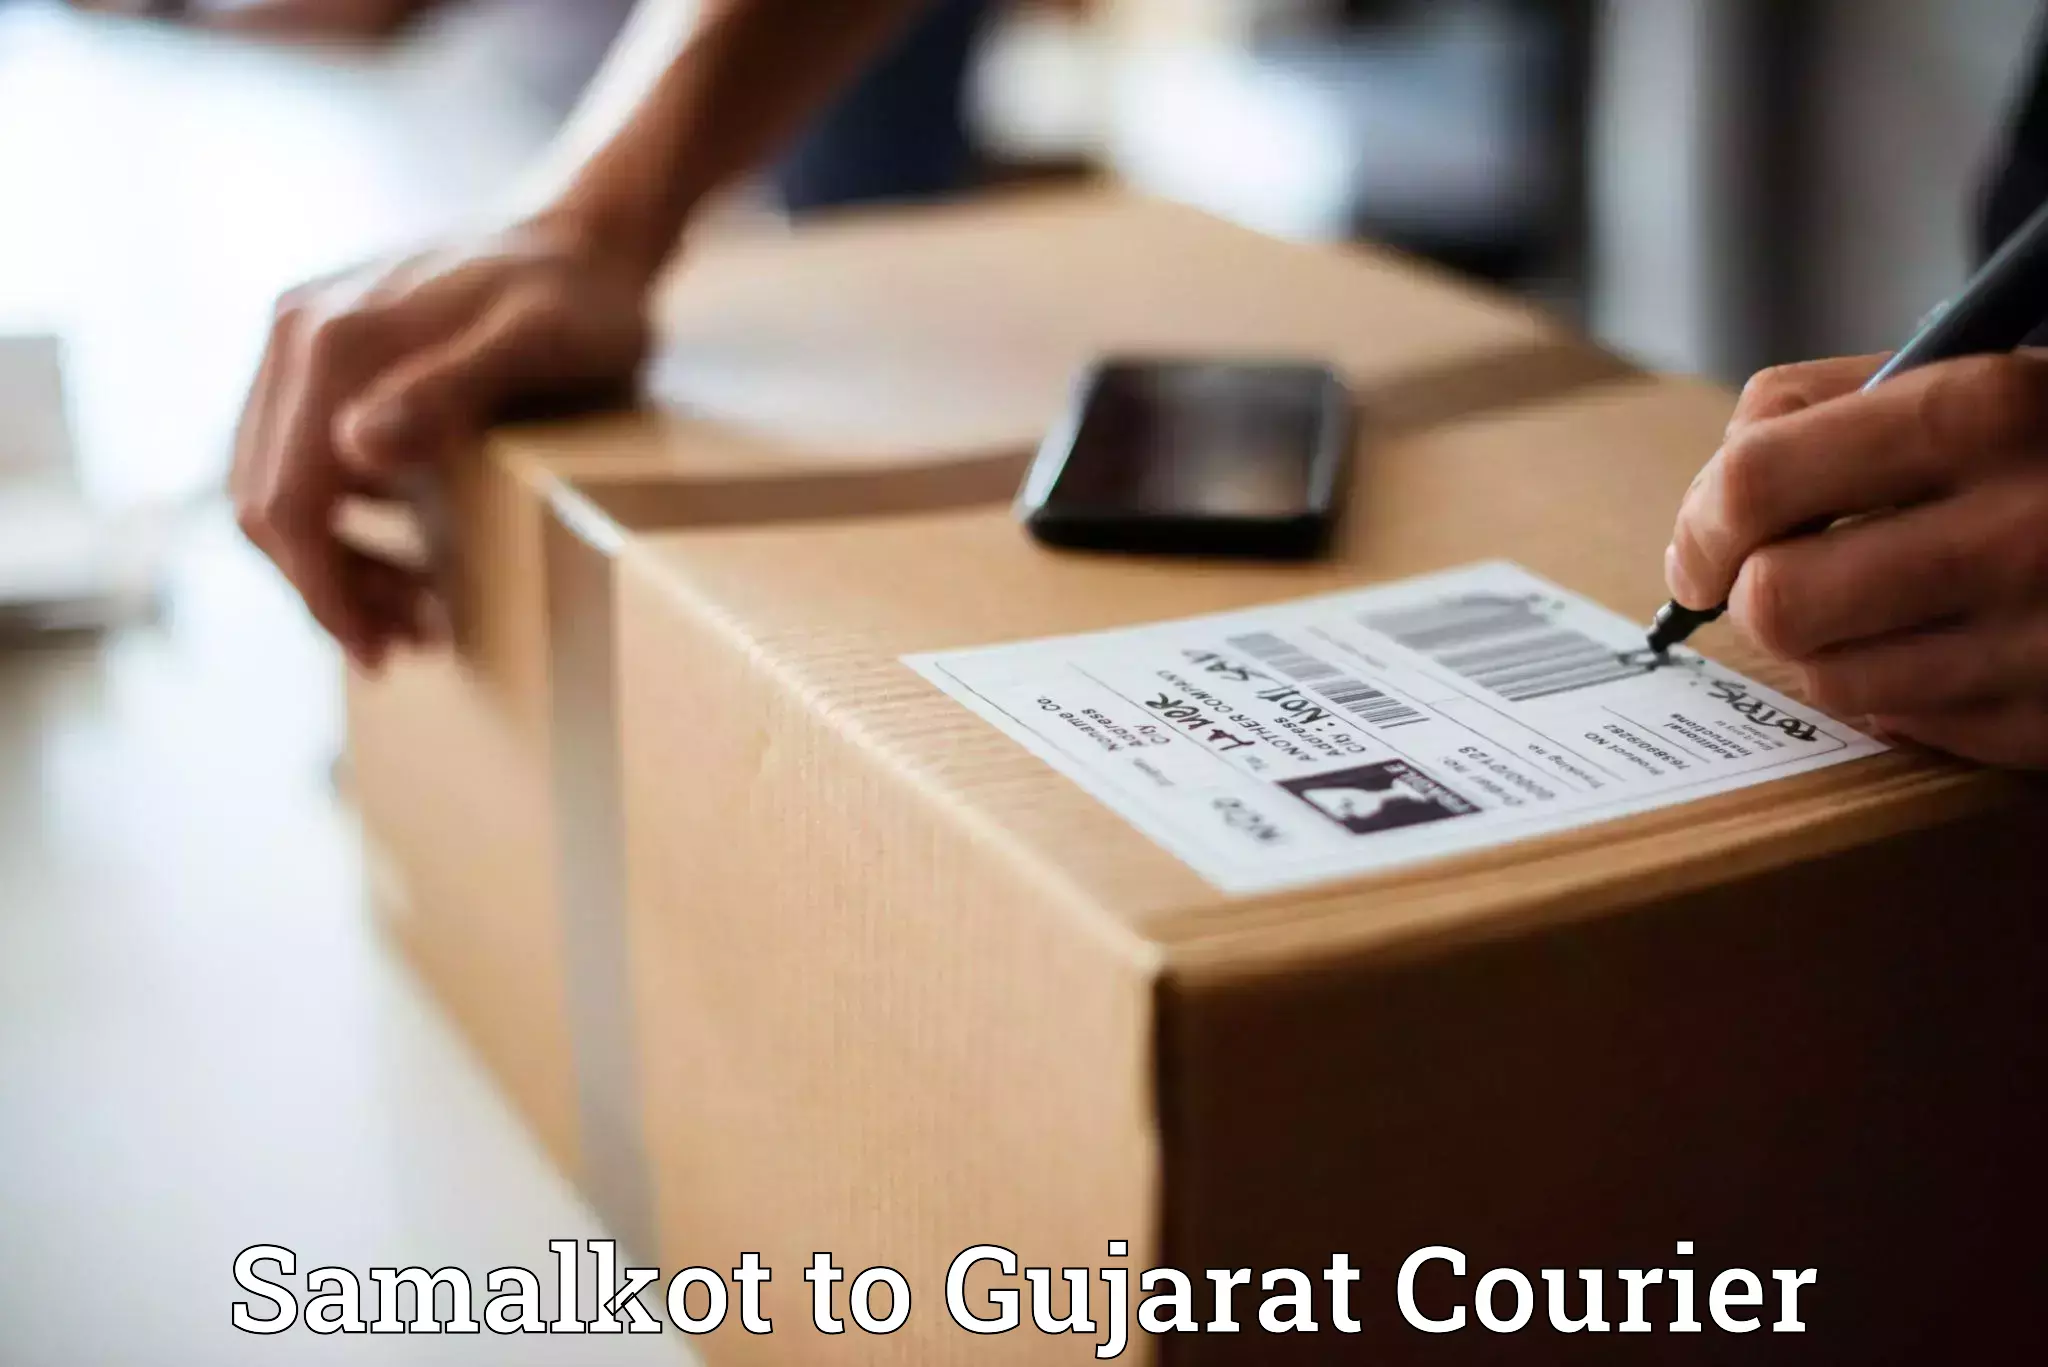 Package delivery network Samalkot to Rajkot